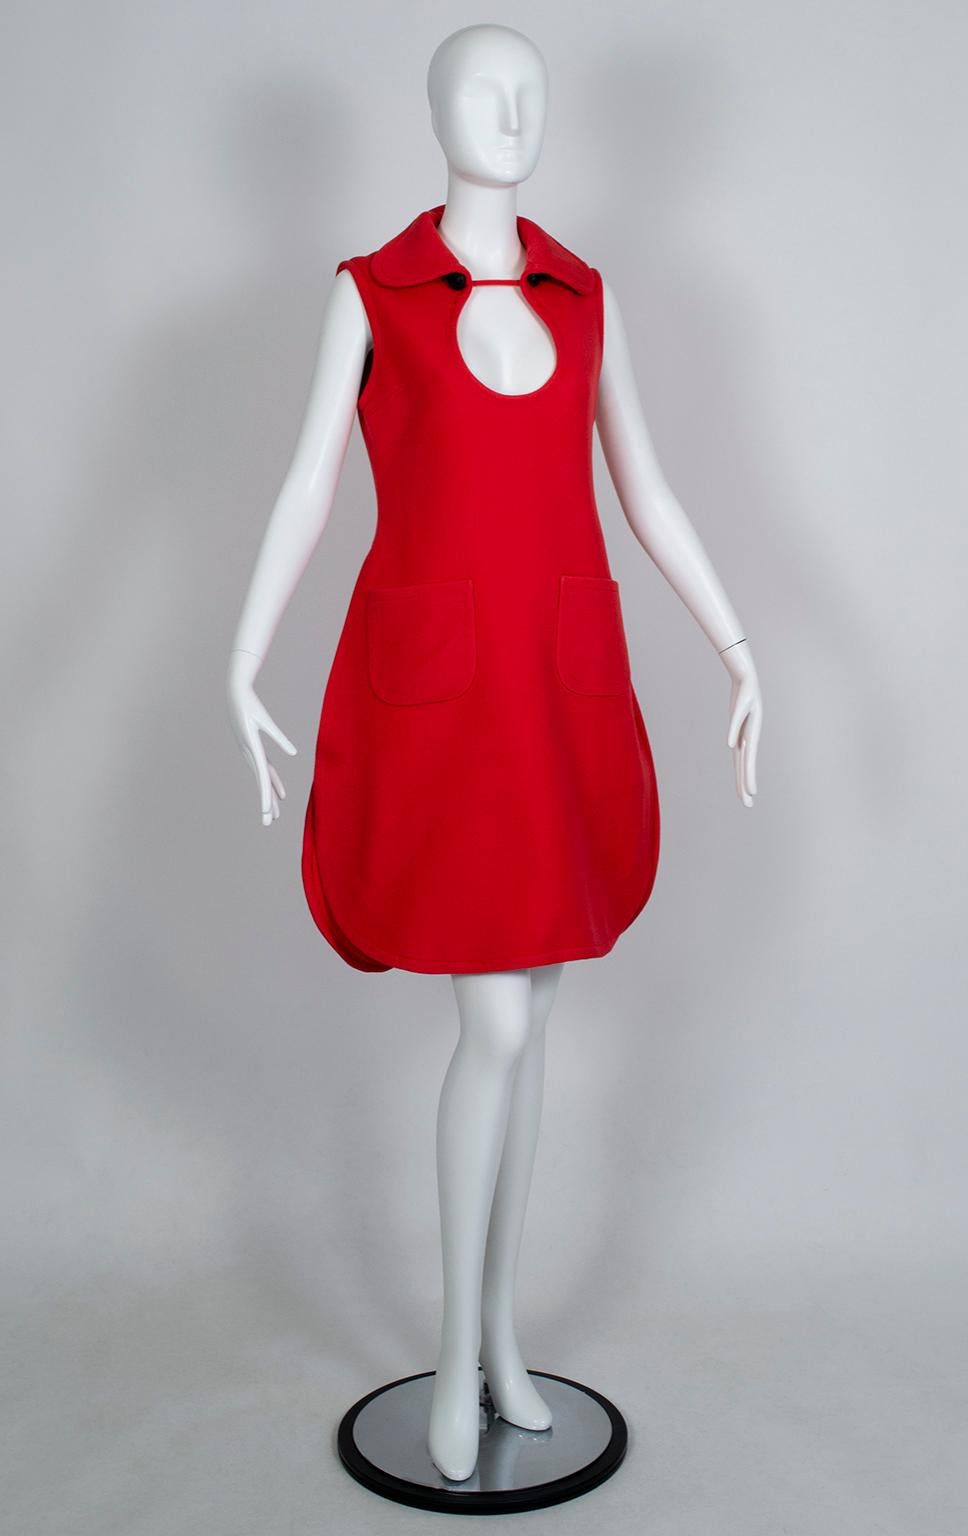 This tabard dress with its structured trapeze shape, curving teardrop hem and mid-chest cutout is an unlabeled prototype from one of Cardin’s late 60s collections. It was acquired from the London estate of Anne Dettmer, whose expansive fashion